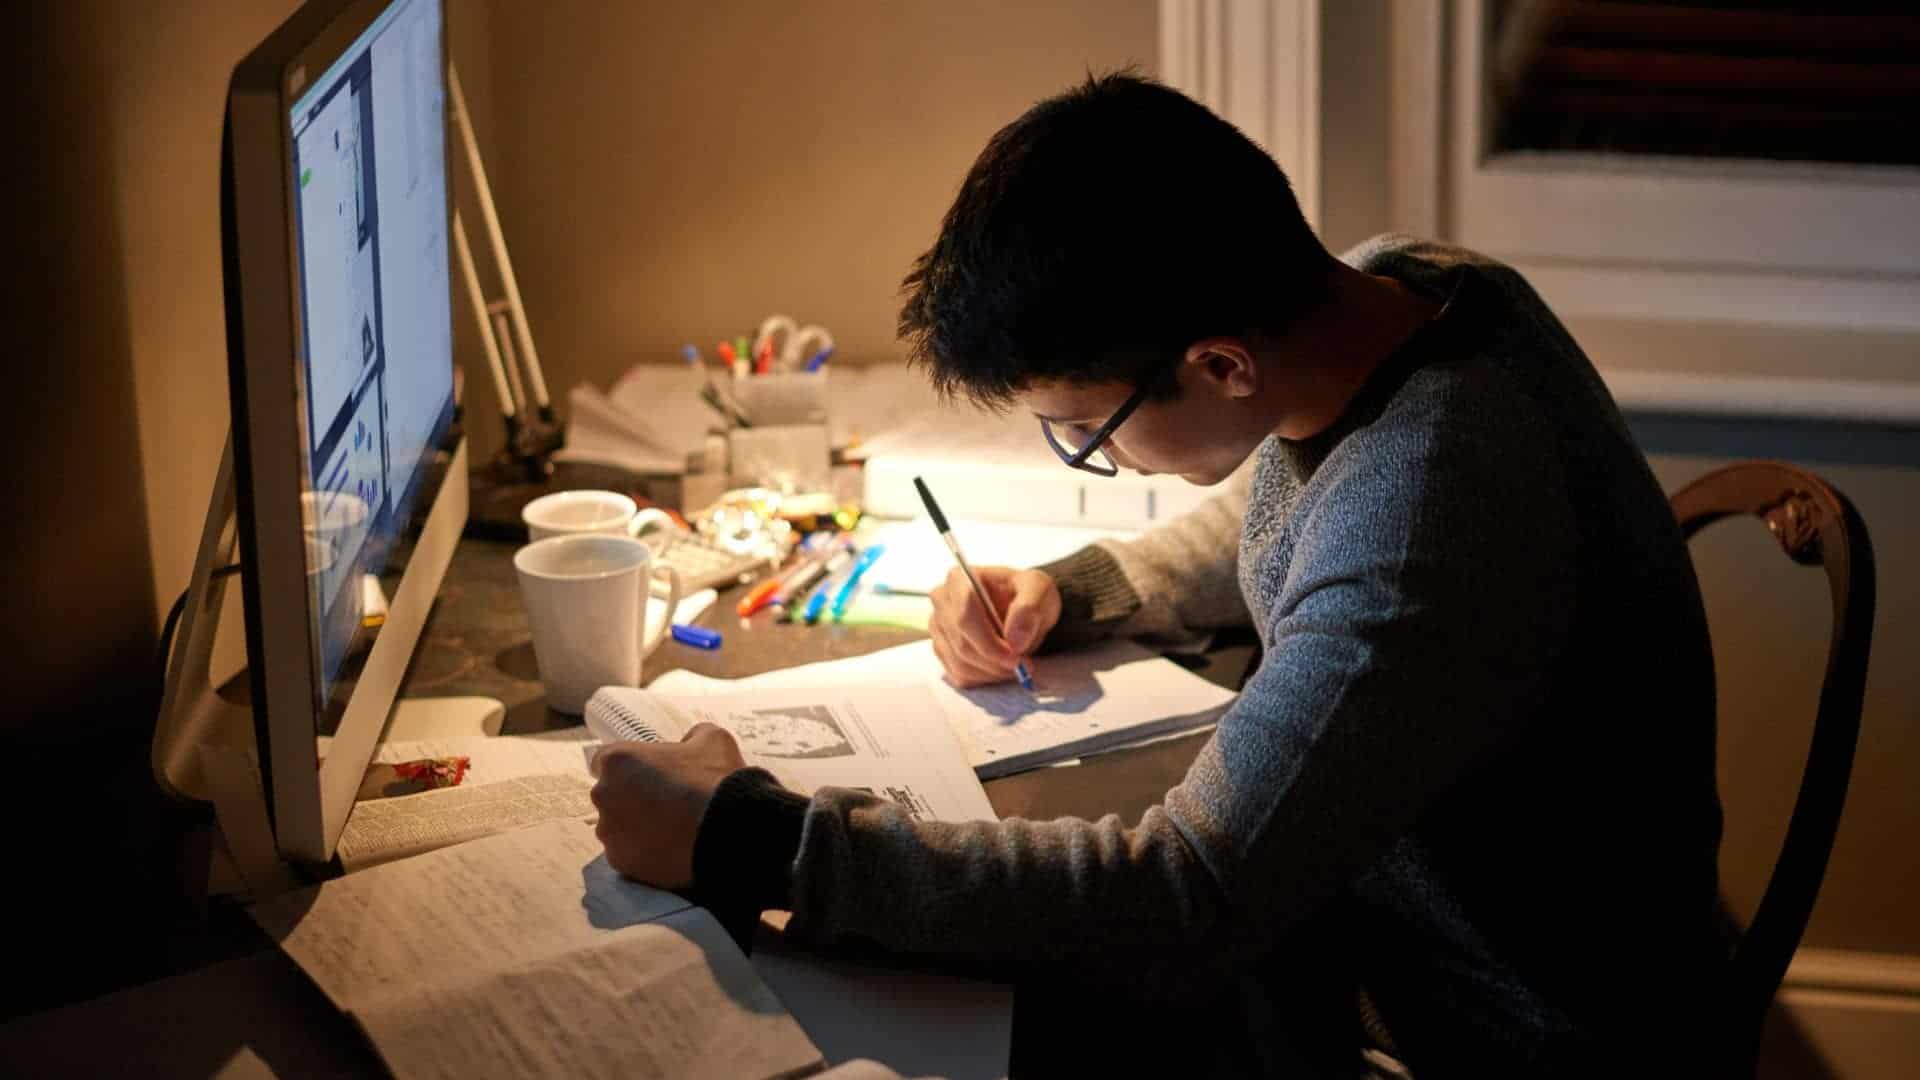 guy students studying alone at desk is a common study mistake to avoid